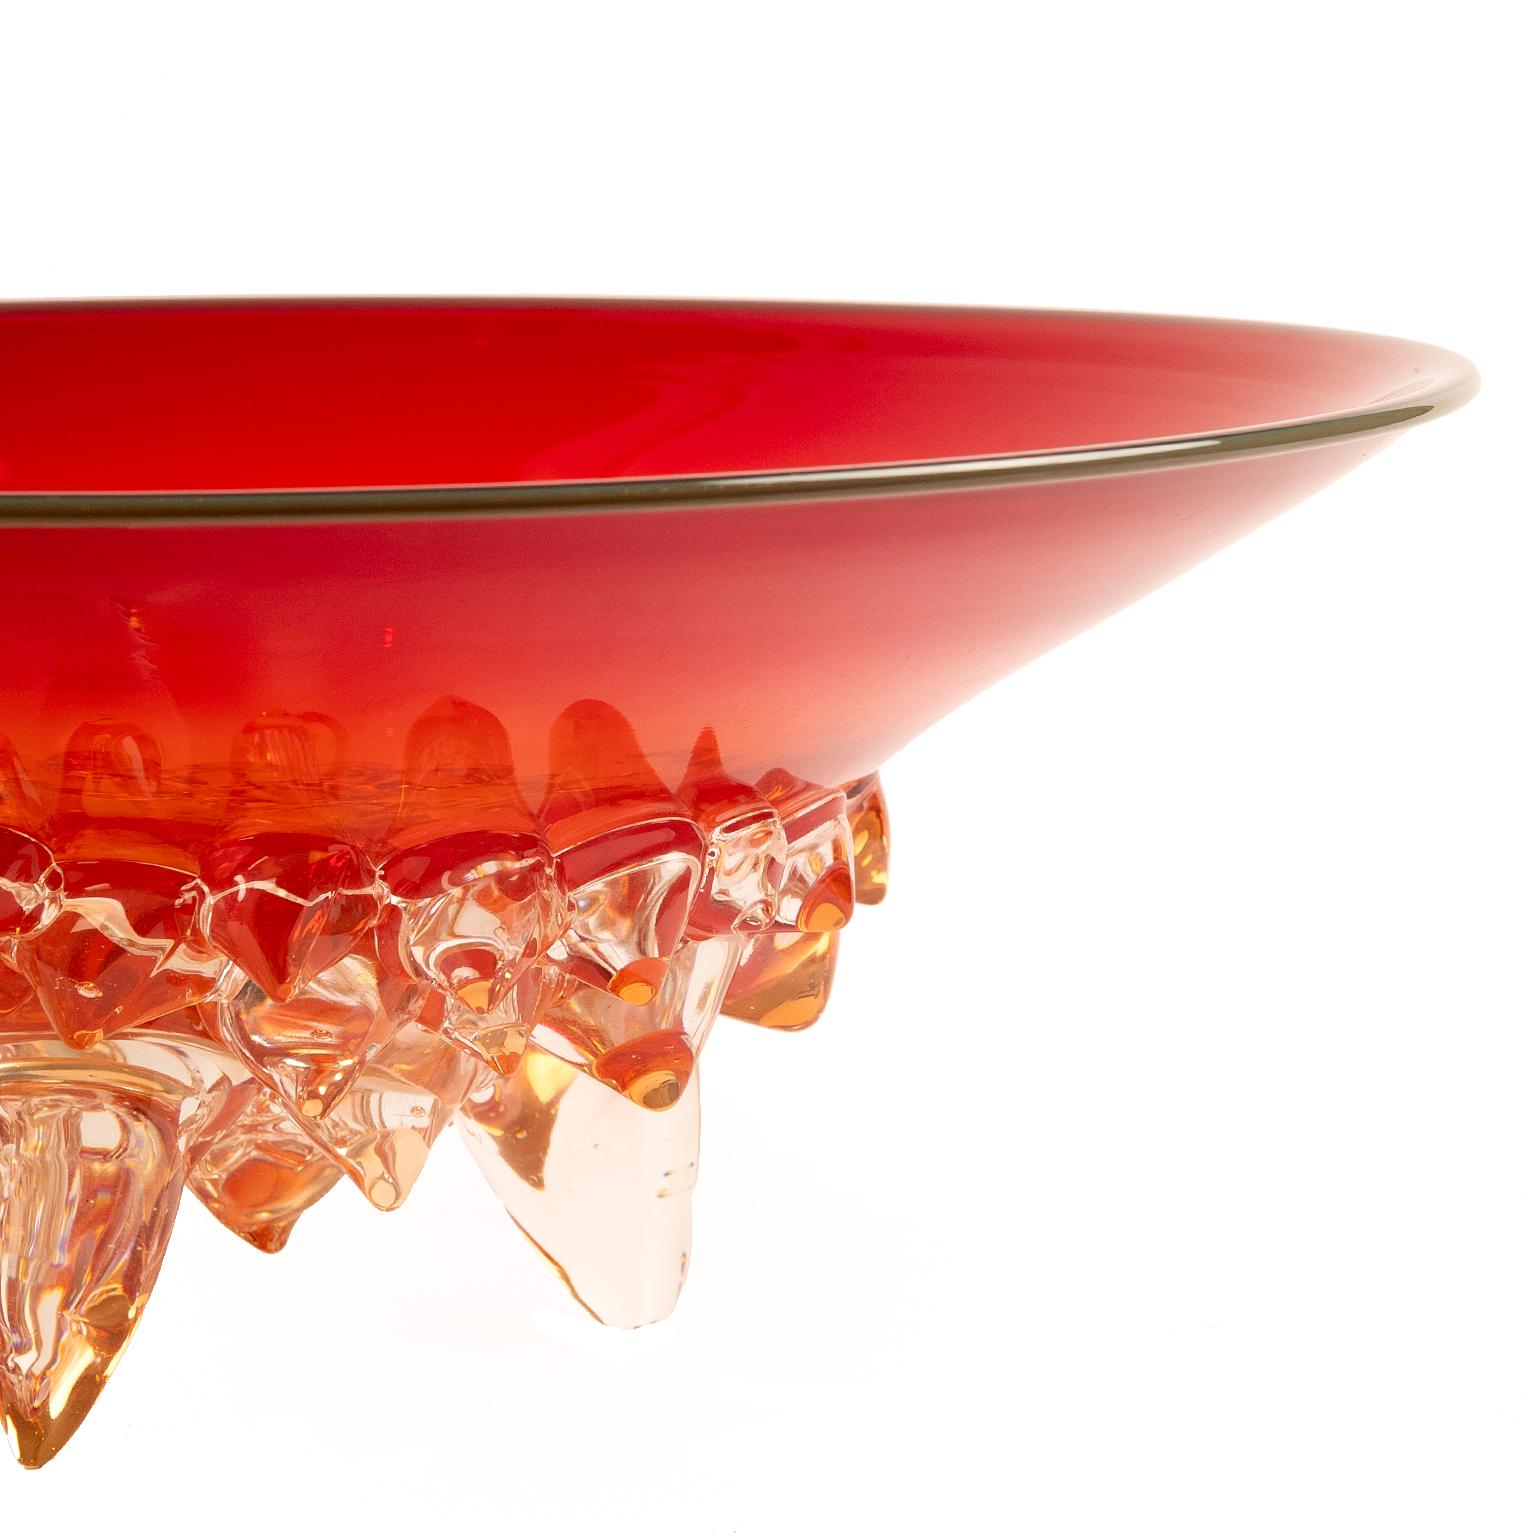 Wow! A stunning large art glass bowl or center piece in vibrant multi dimensional red with clear Restrato style
design underneath decorating and supporting the bowl. It is signed (see photo) and dated 2000.